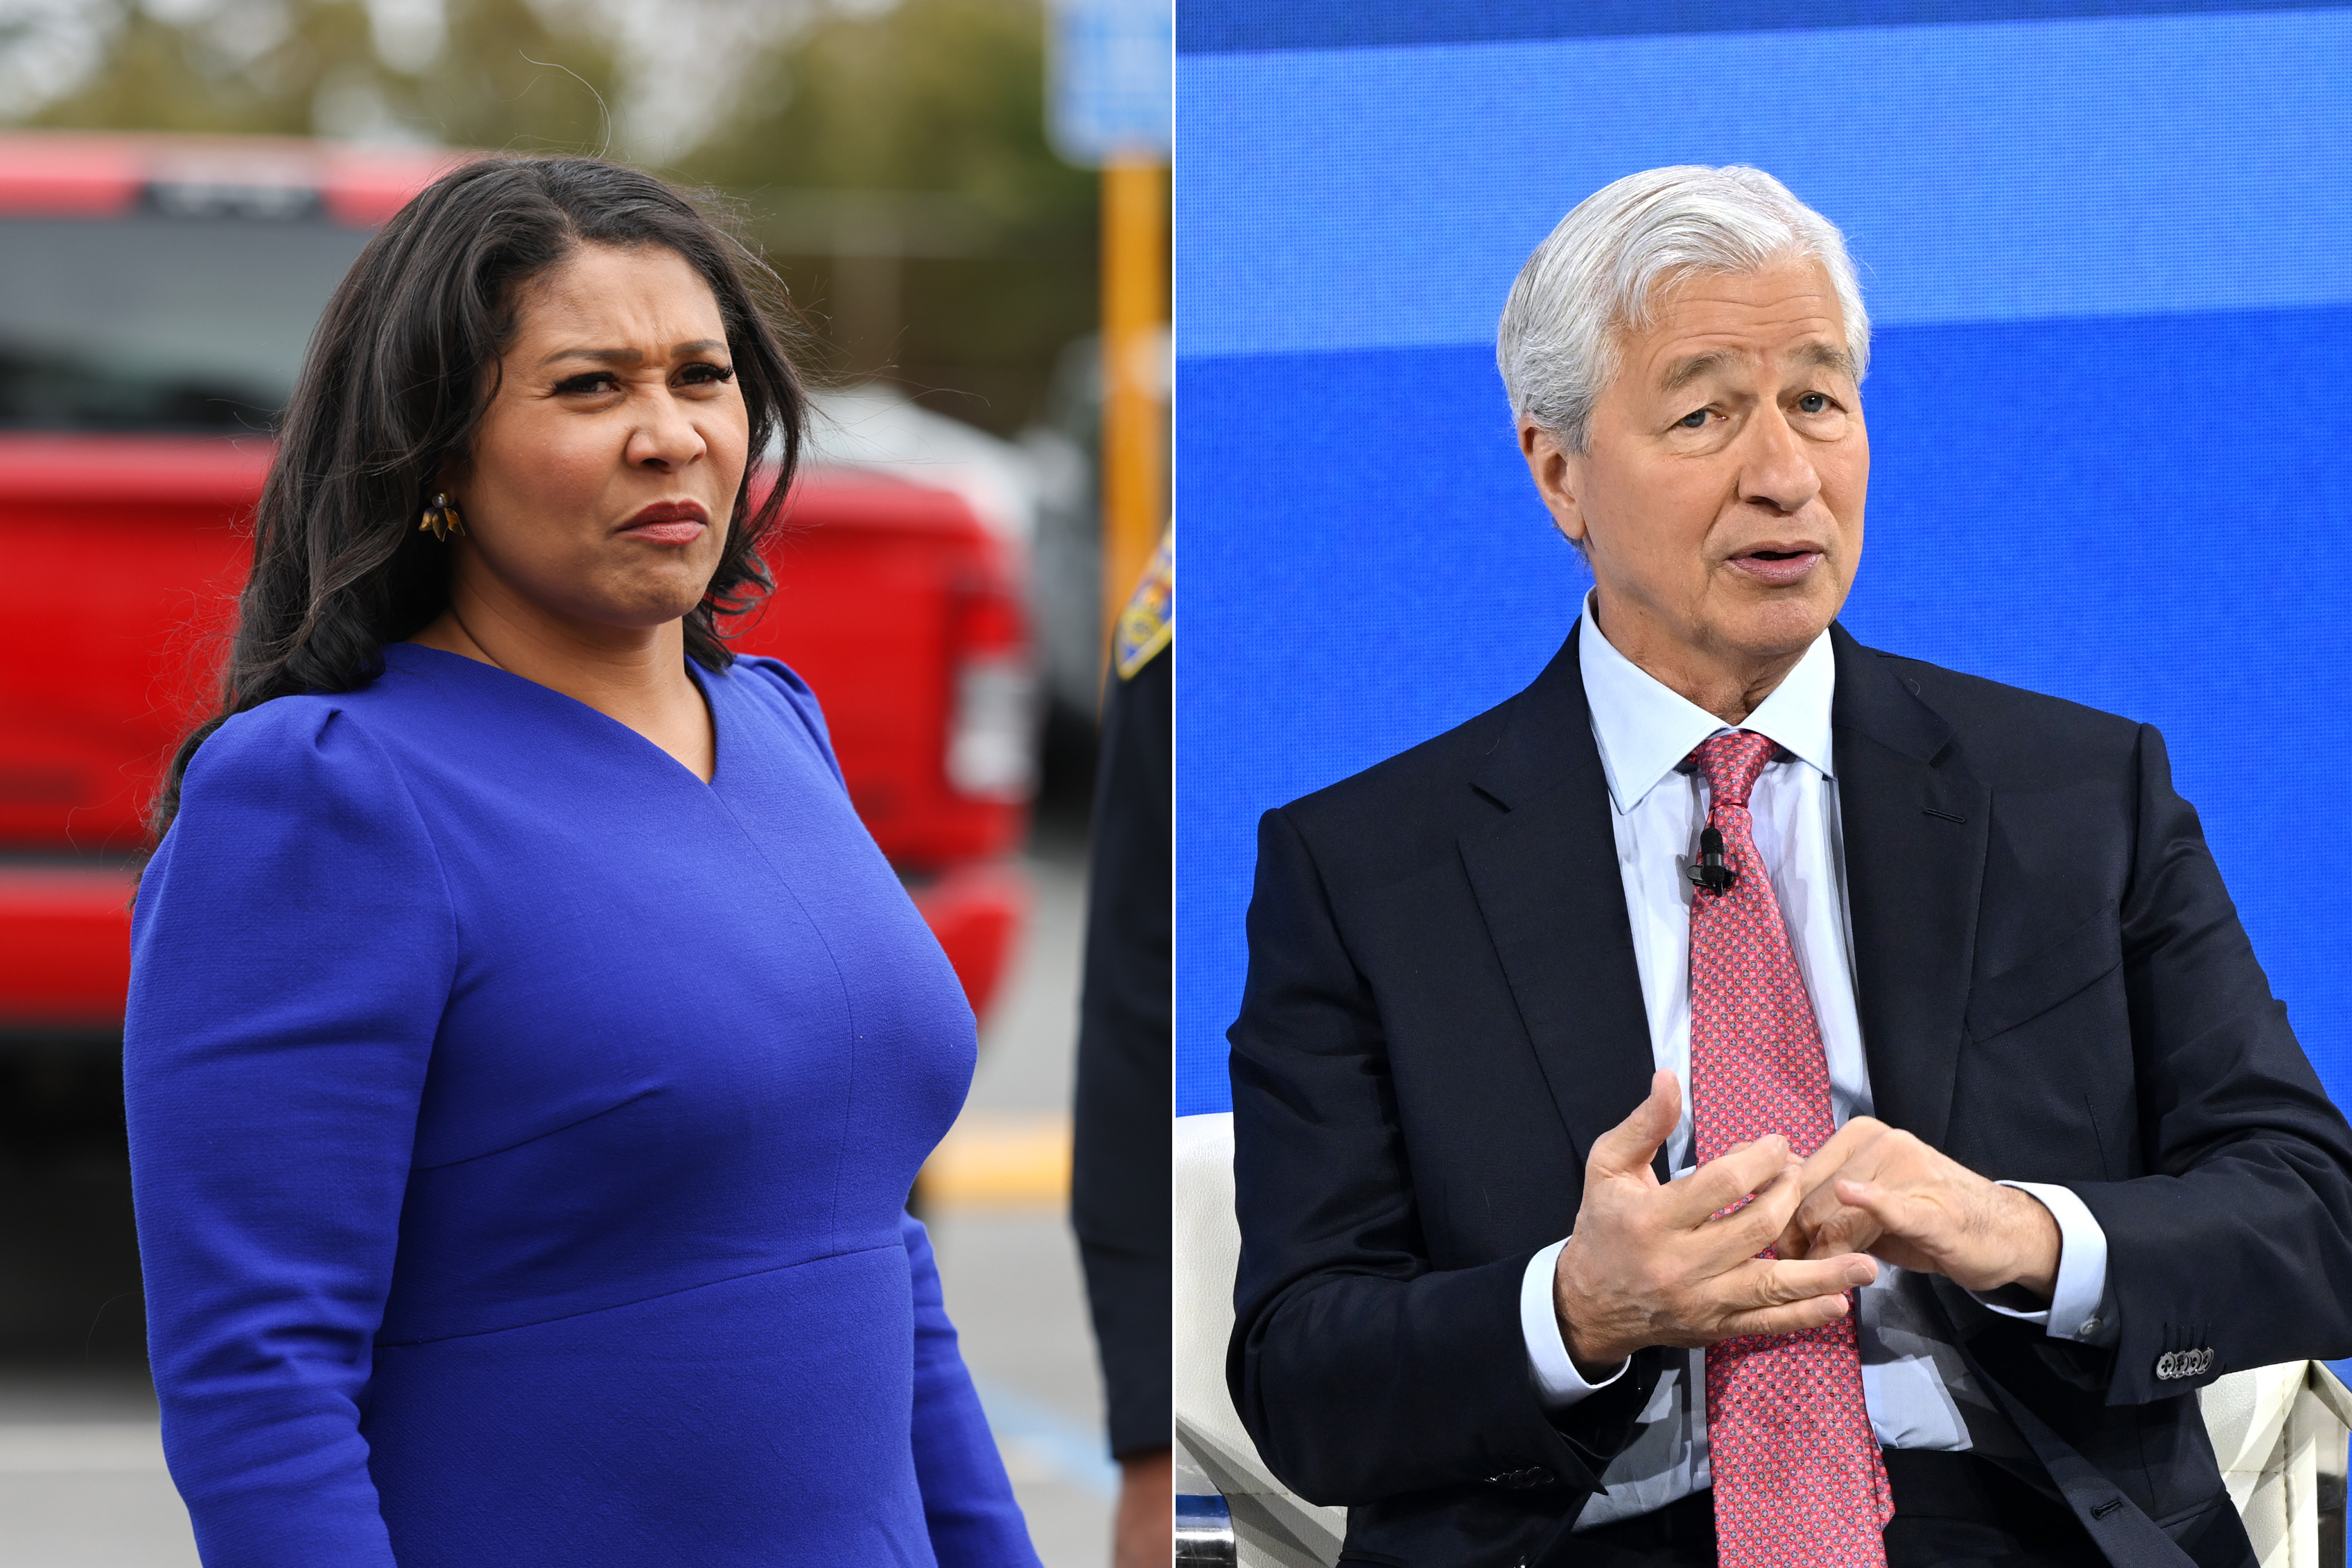 a side-by-side image of San Francisco Mayor London Breed looking angry and JPMorgan Chase CEO Jamie Damon wearing a black suit while clasping his hands.